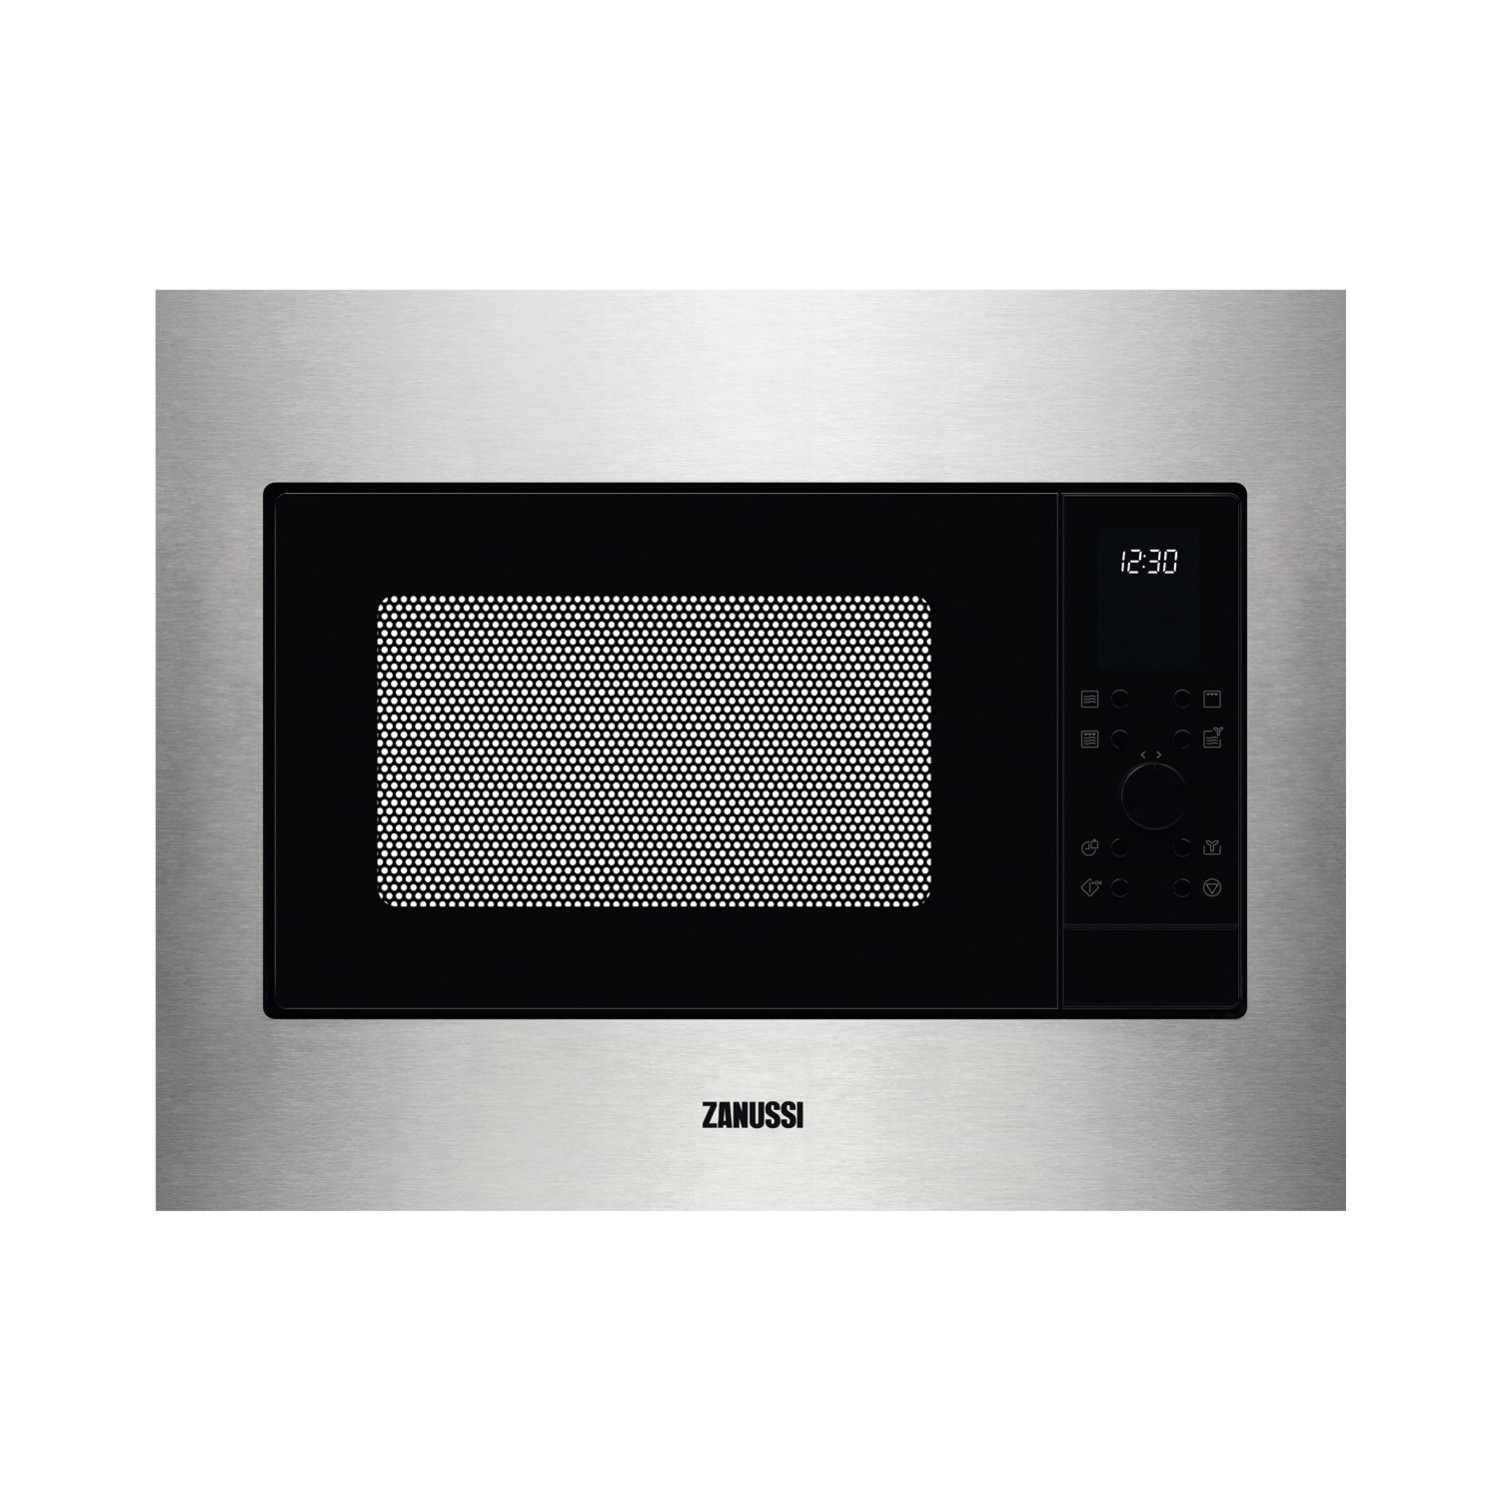 Refurbished Zanussi ZMSN4CX Built In 25L 900W Compact Combination Microwave Stainless Steel